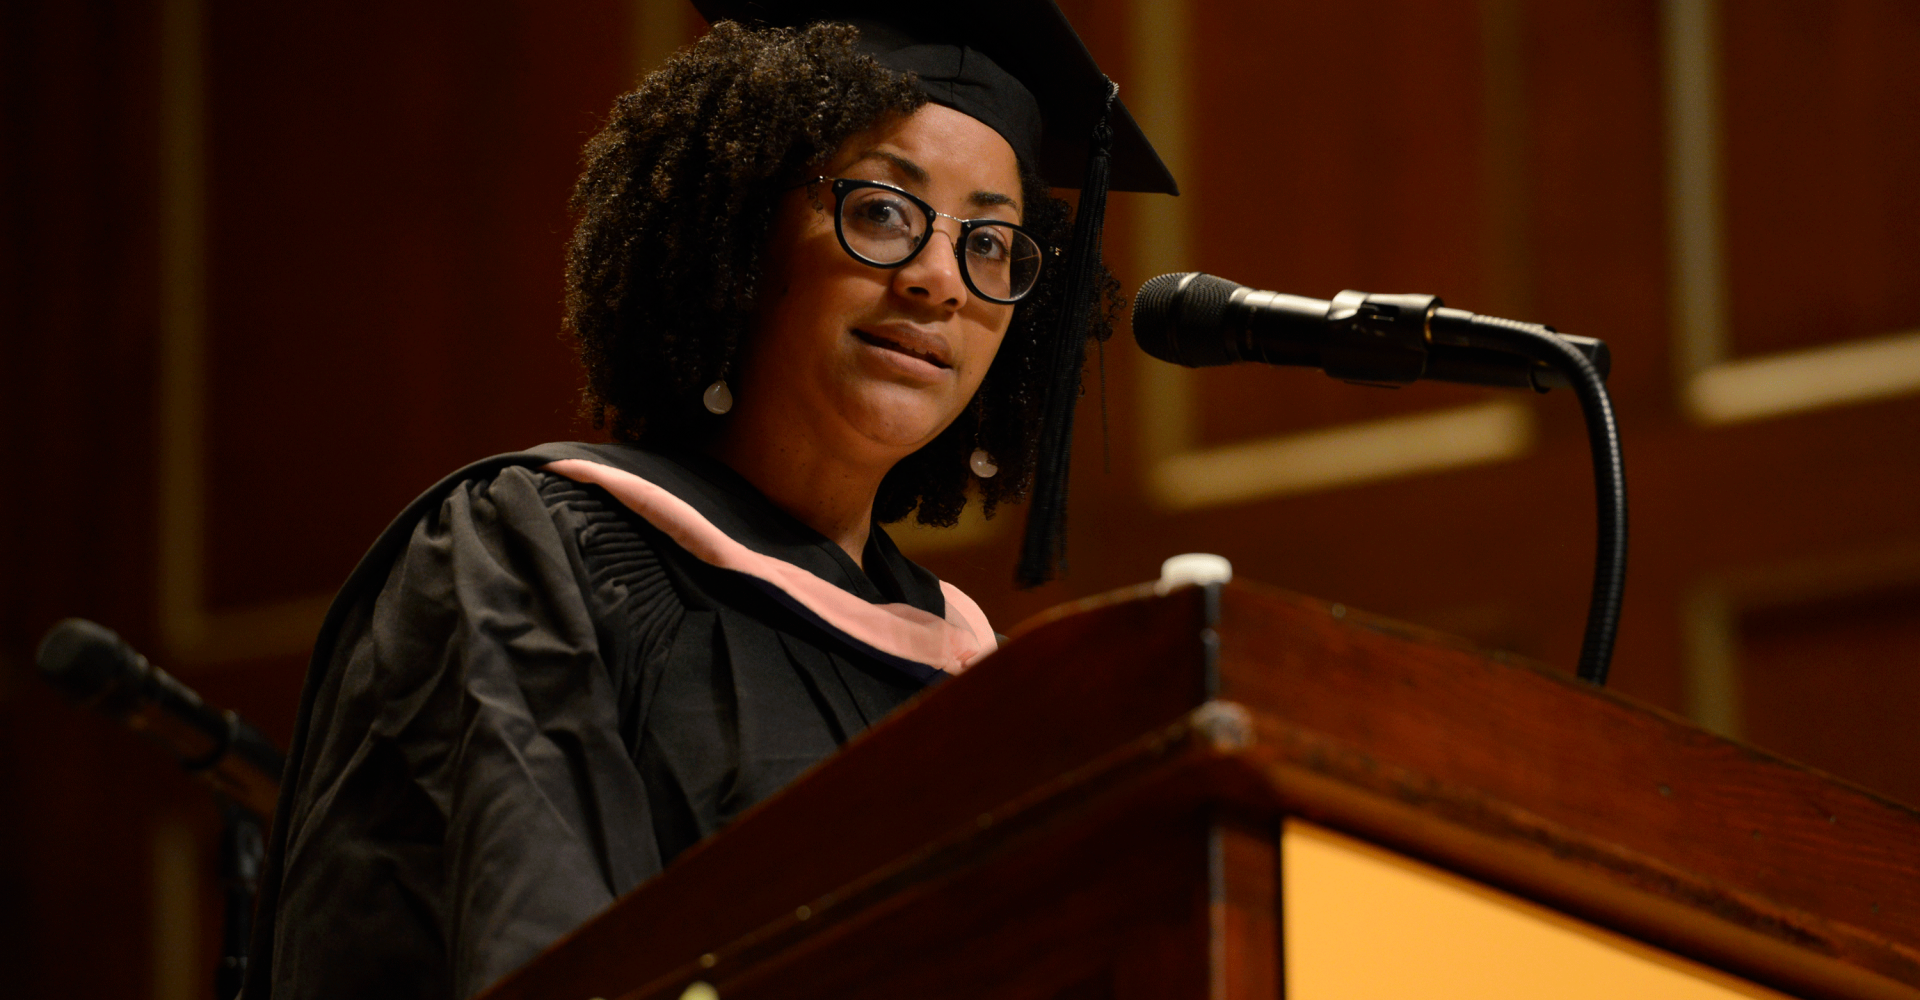 Ashleigh Gordon speaks at the podium during Commencement 2019